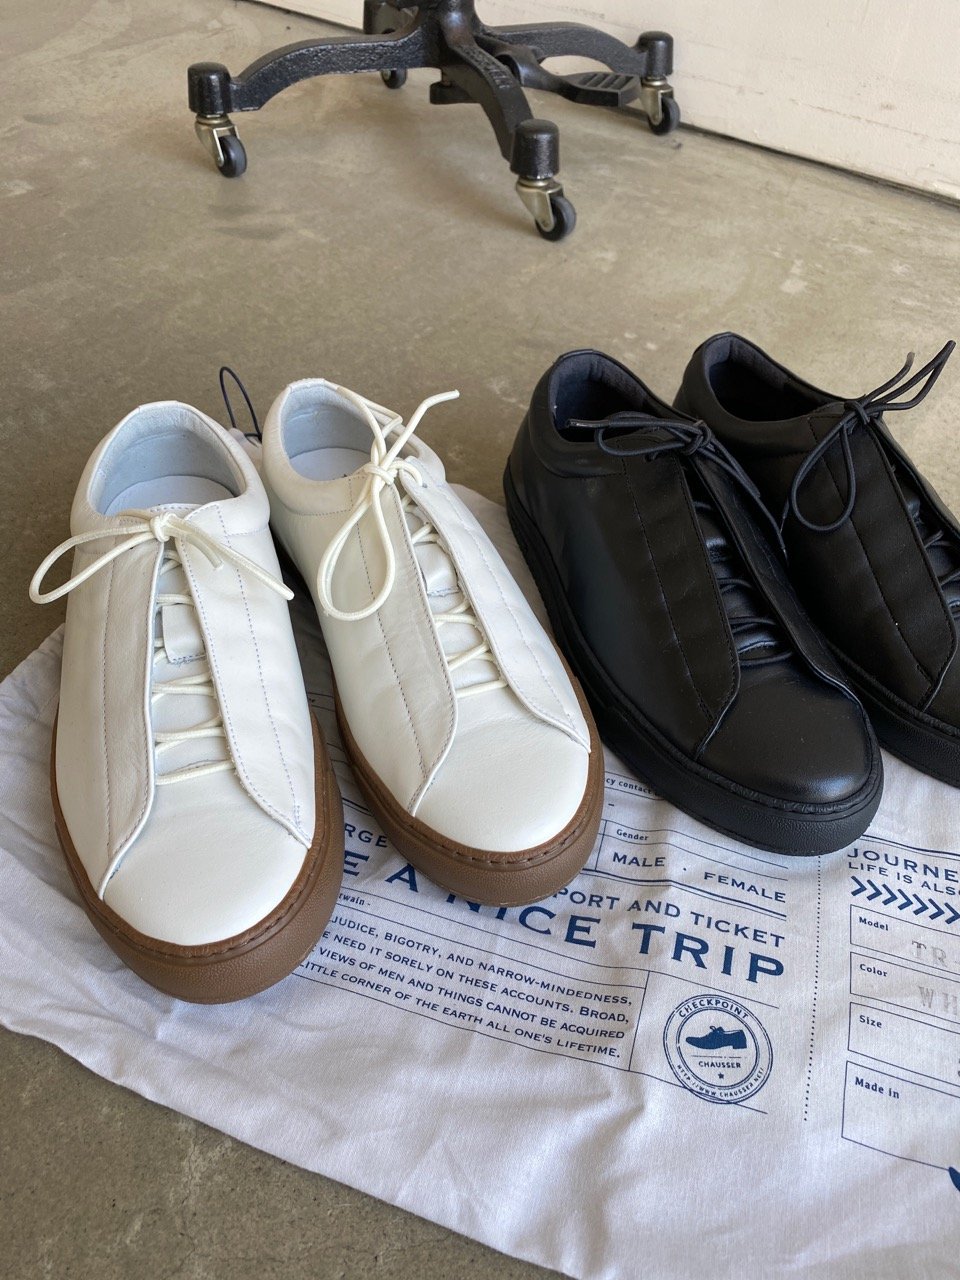 TRAVEL SHOES by chausser レザーフラットシューズ TR-013